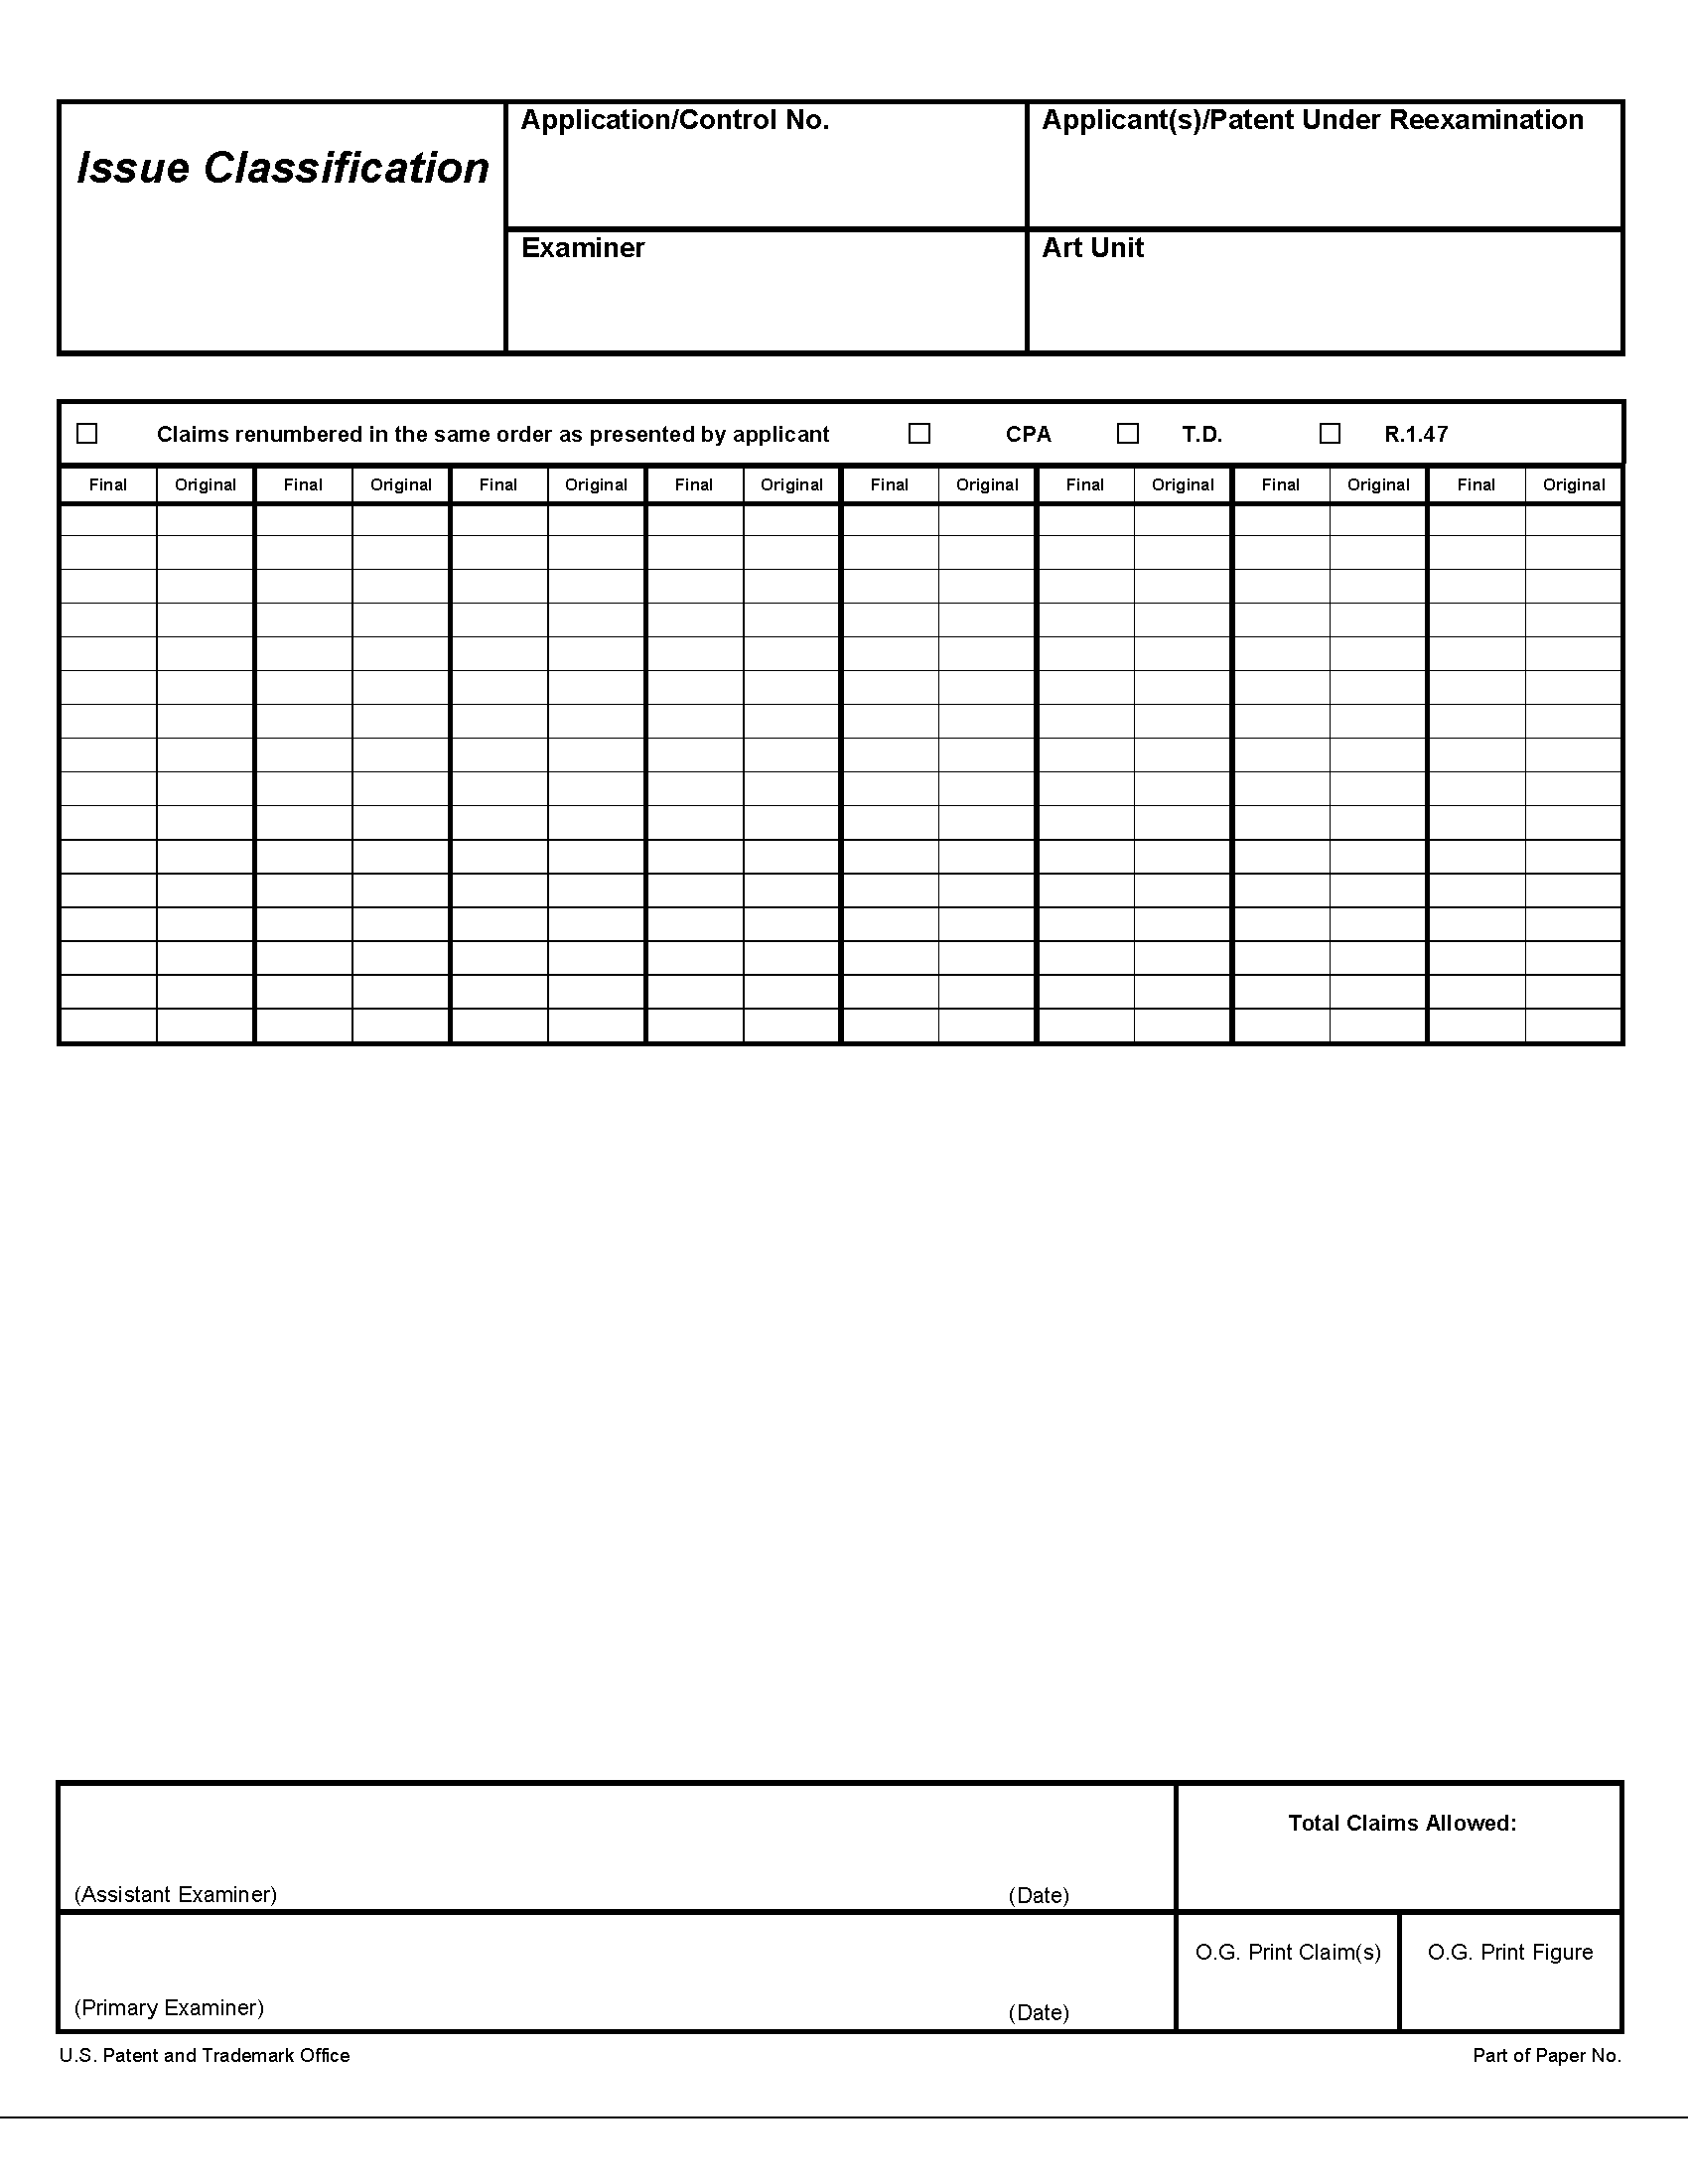 Issue Classification Sheet page 3